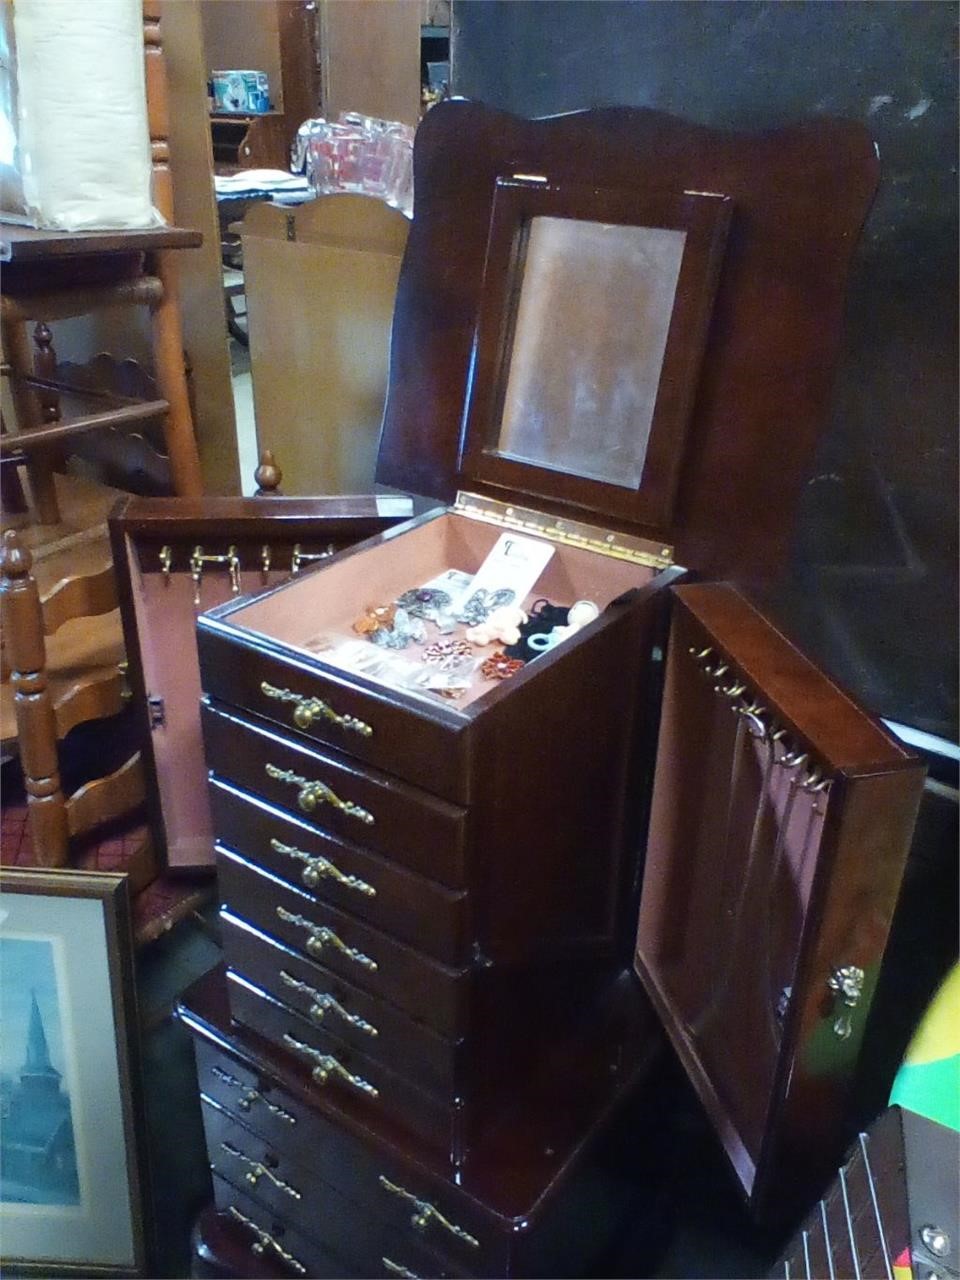 FINE FURNITURE, COINS,SEVERAL FIREARMS, COLLECTIBLES